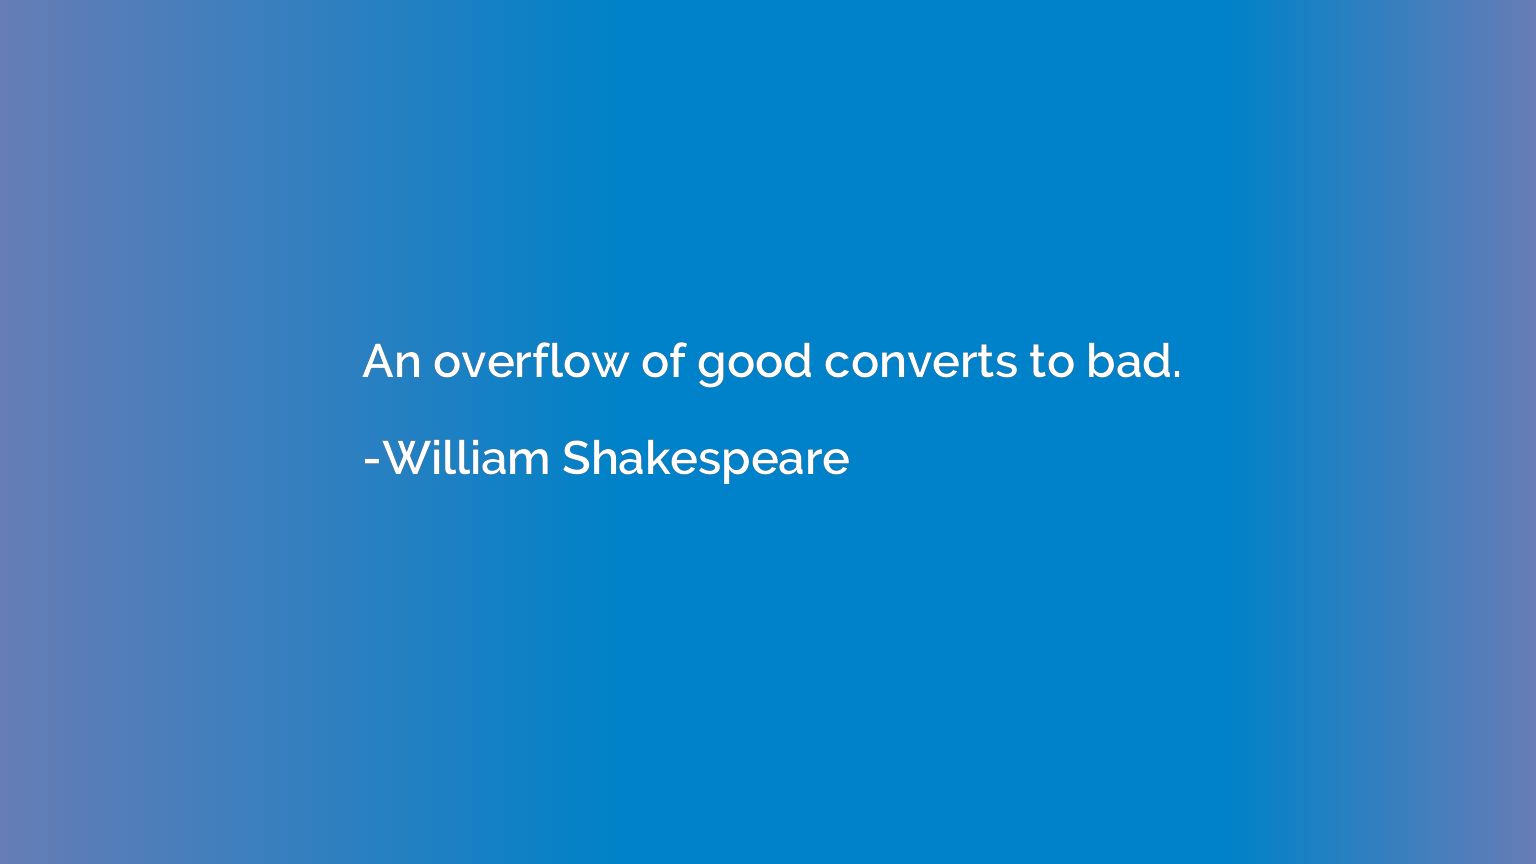 An overflow of good converts to bad.